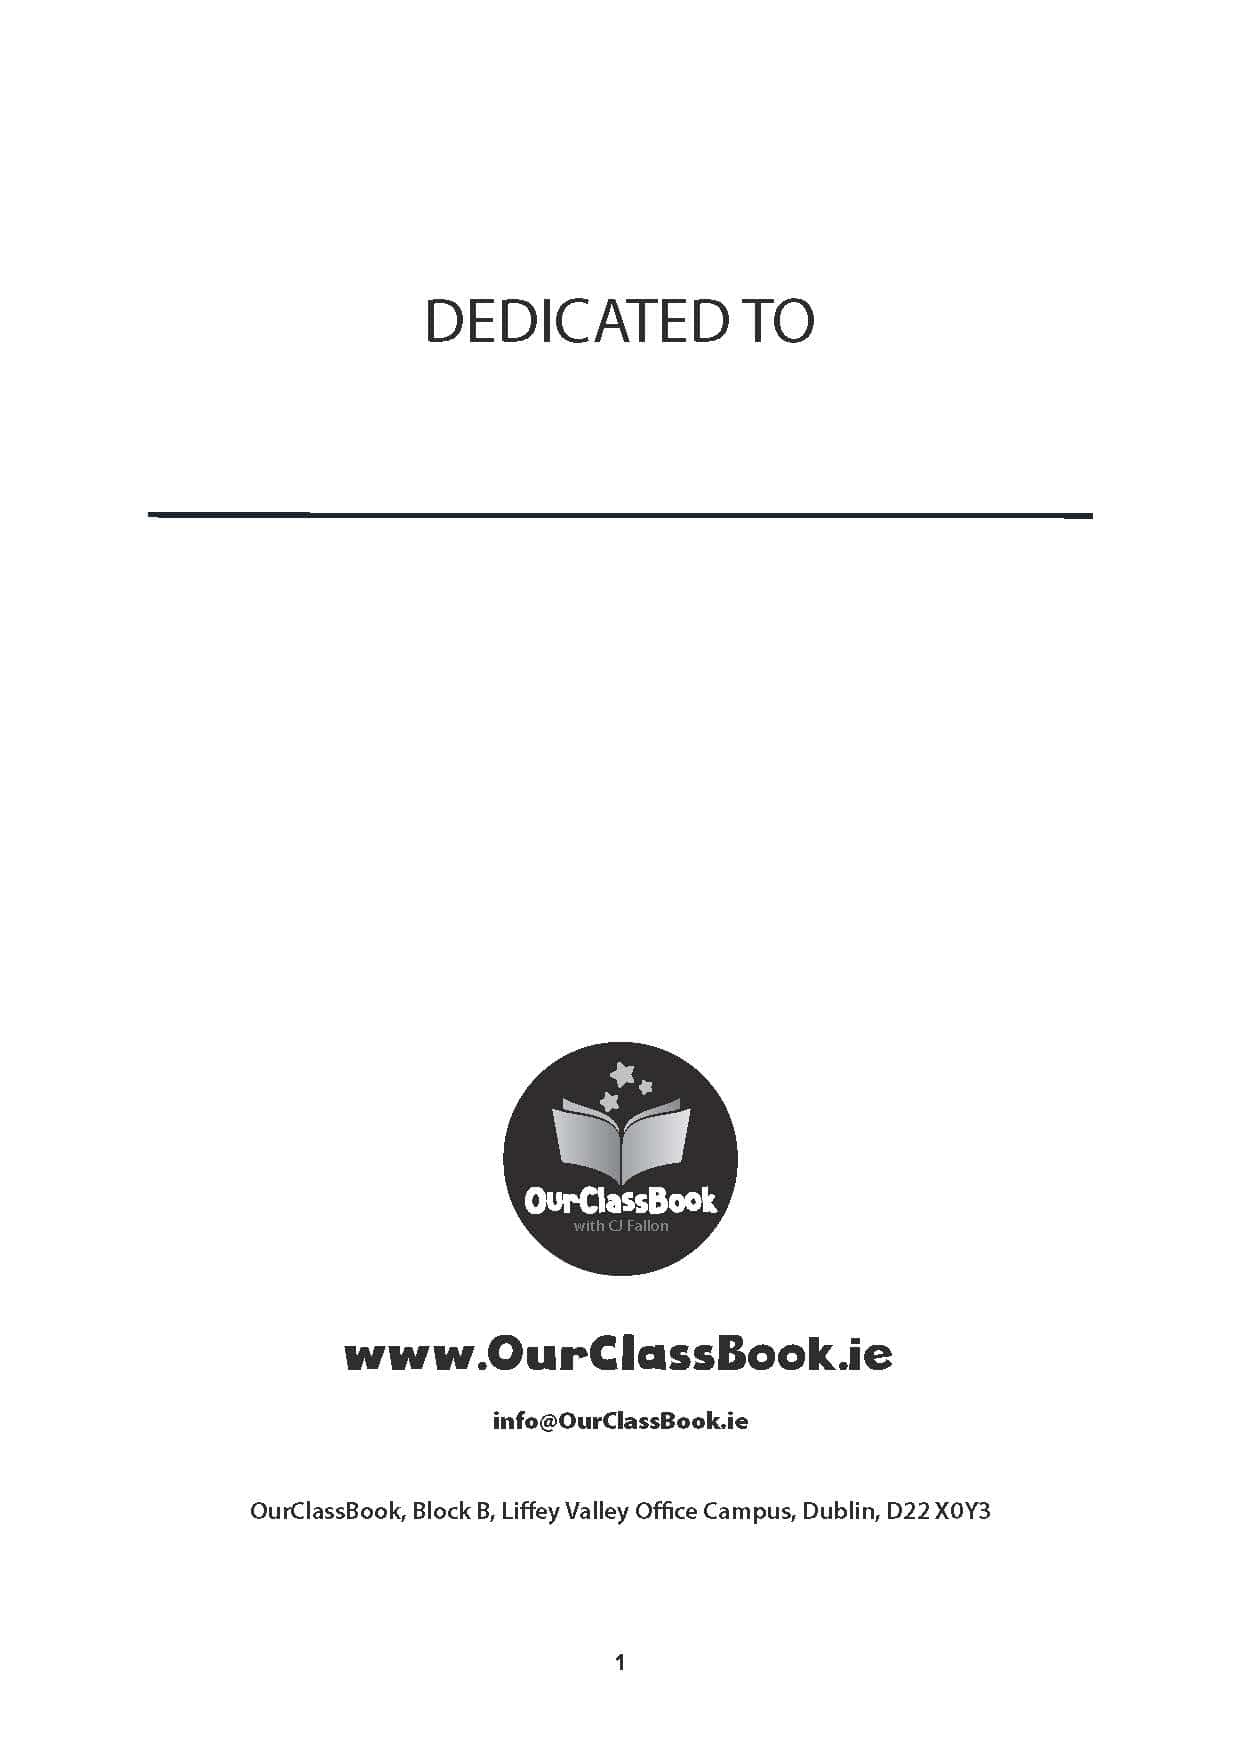 Dedicate your class' story